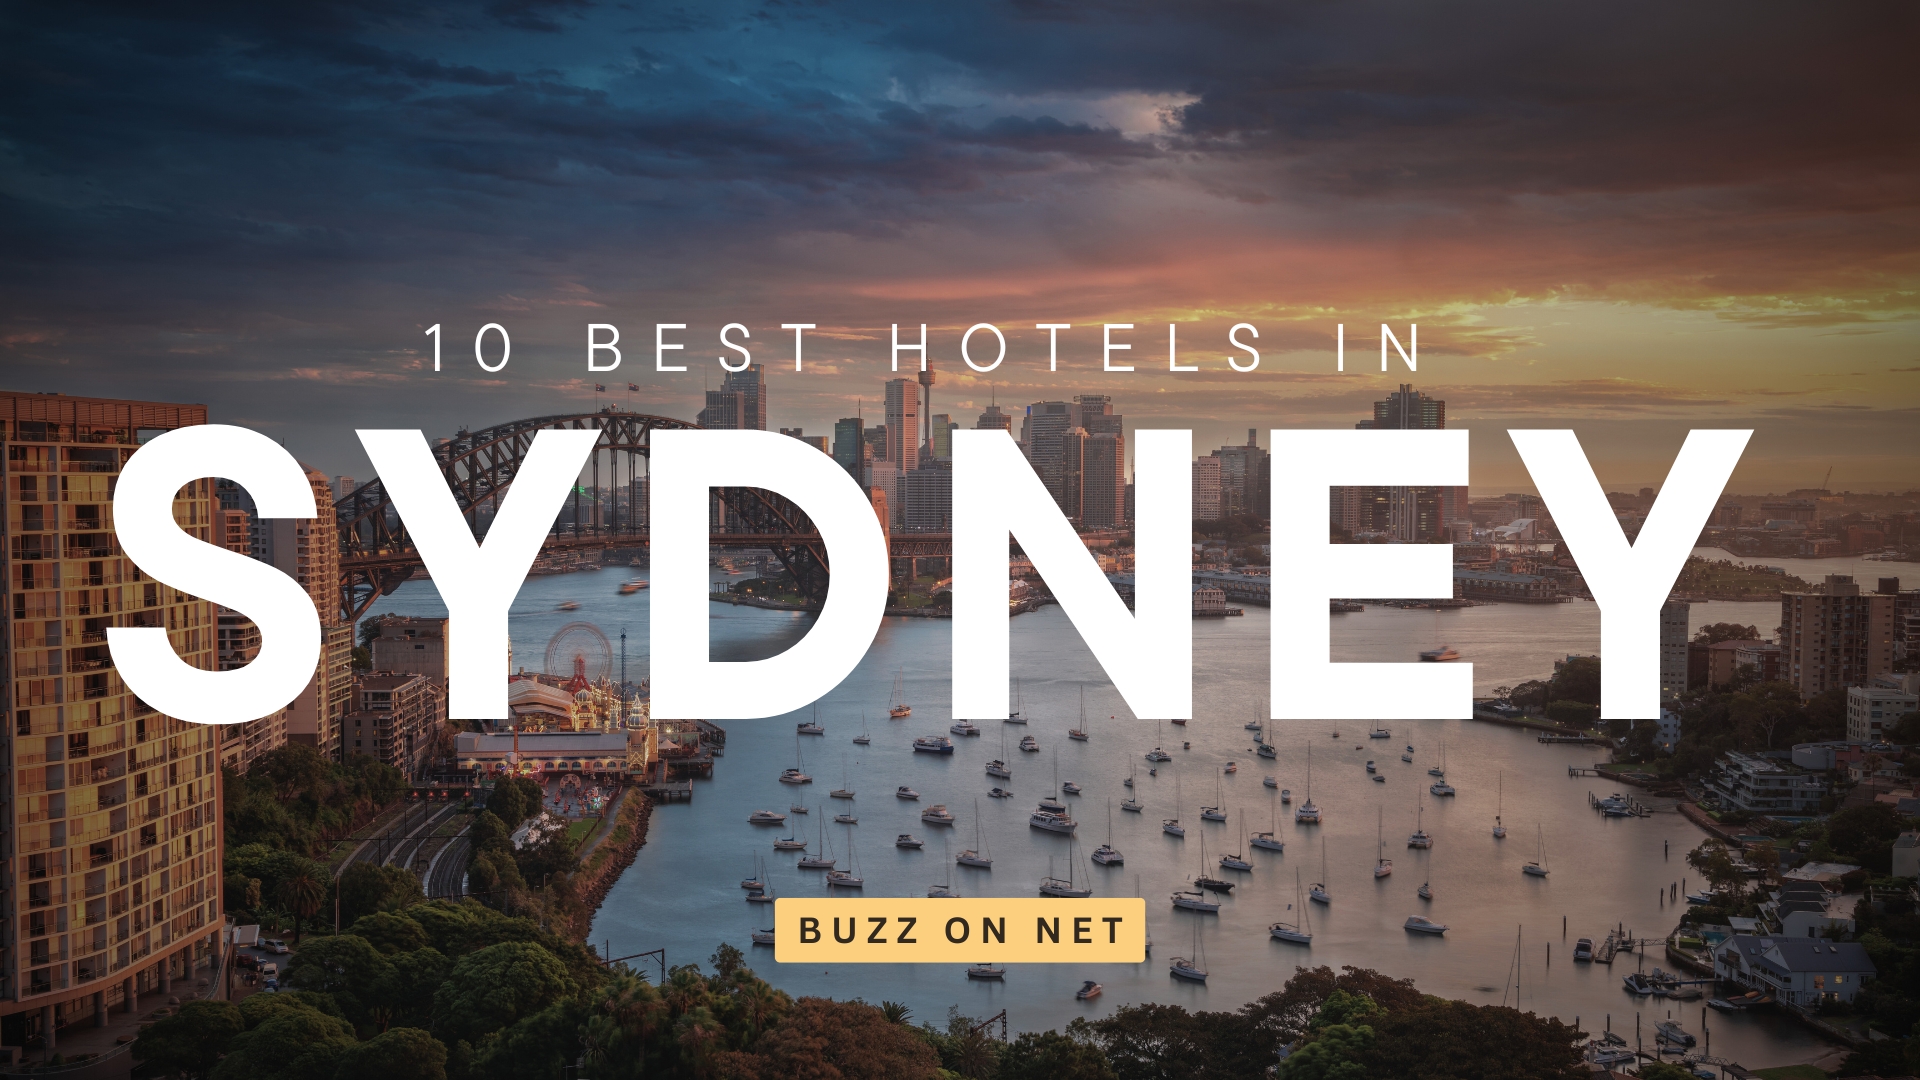 10 Best Hotels In Sydney: A Definitive Guide